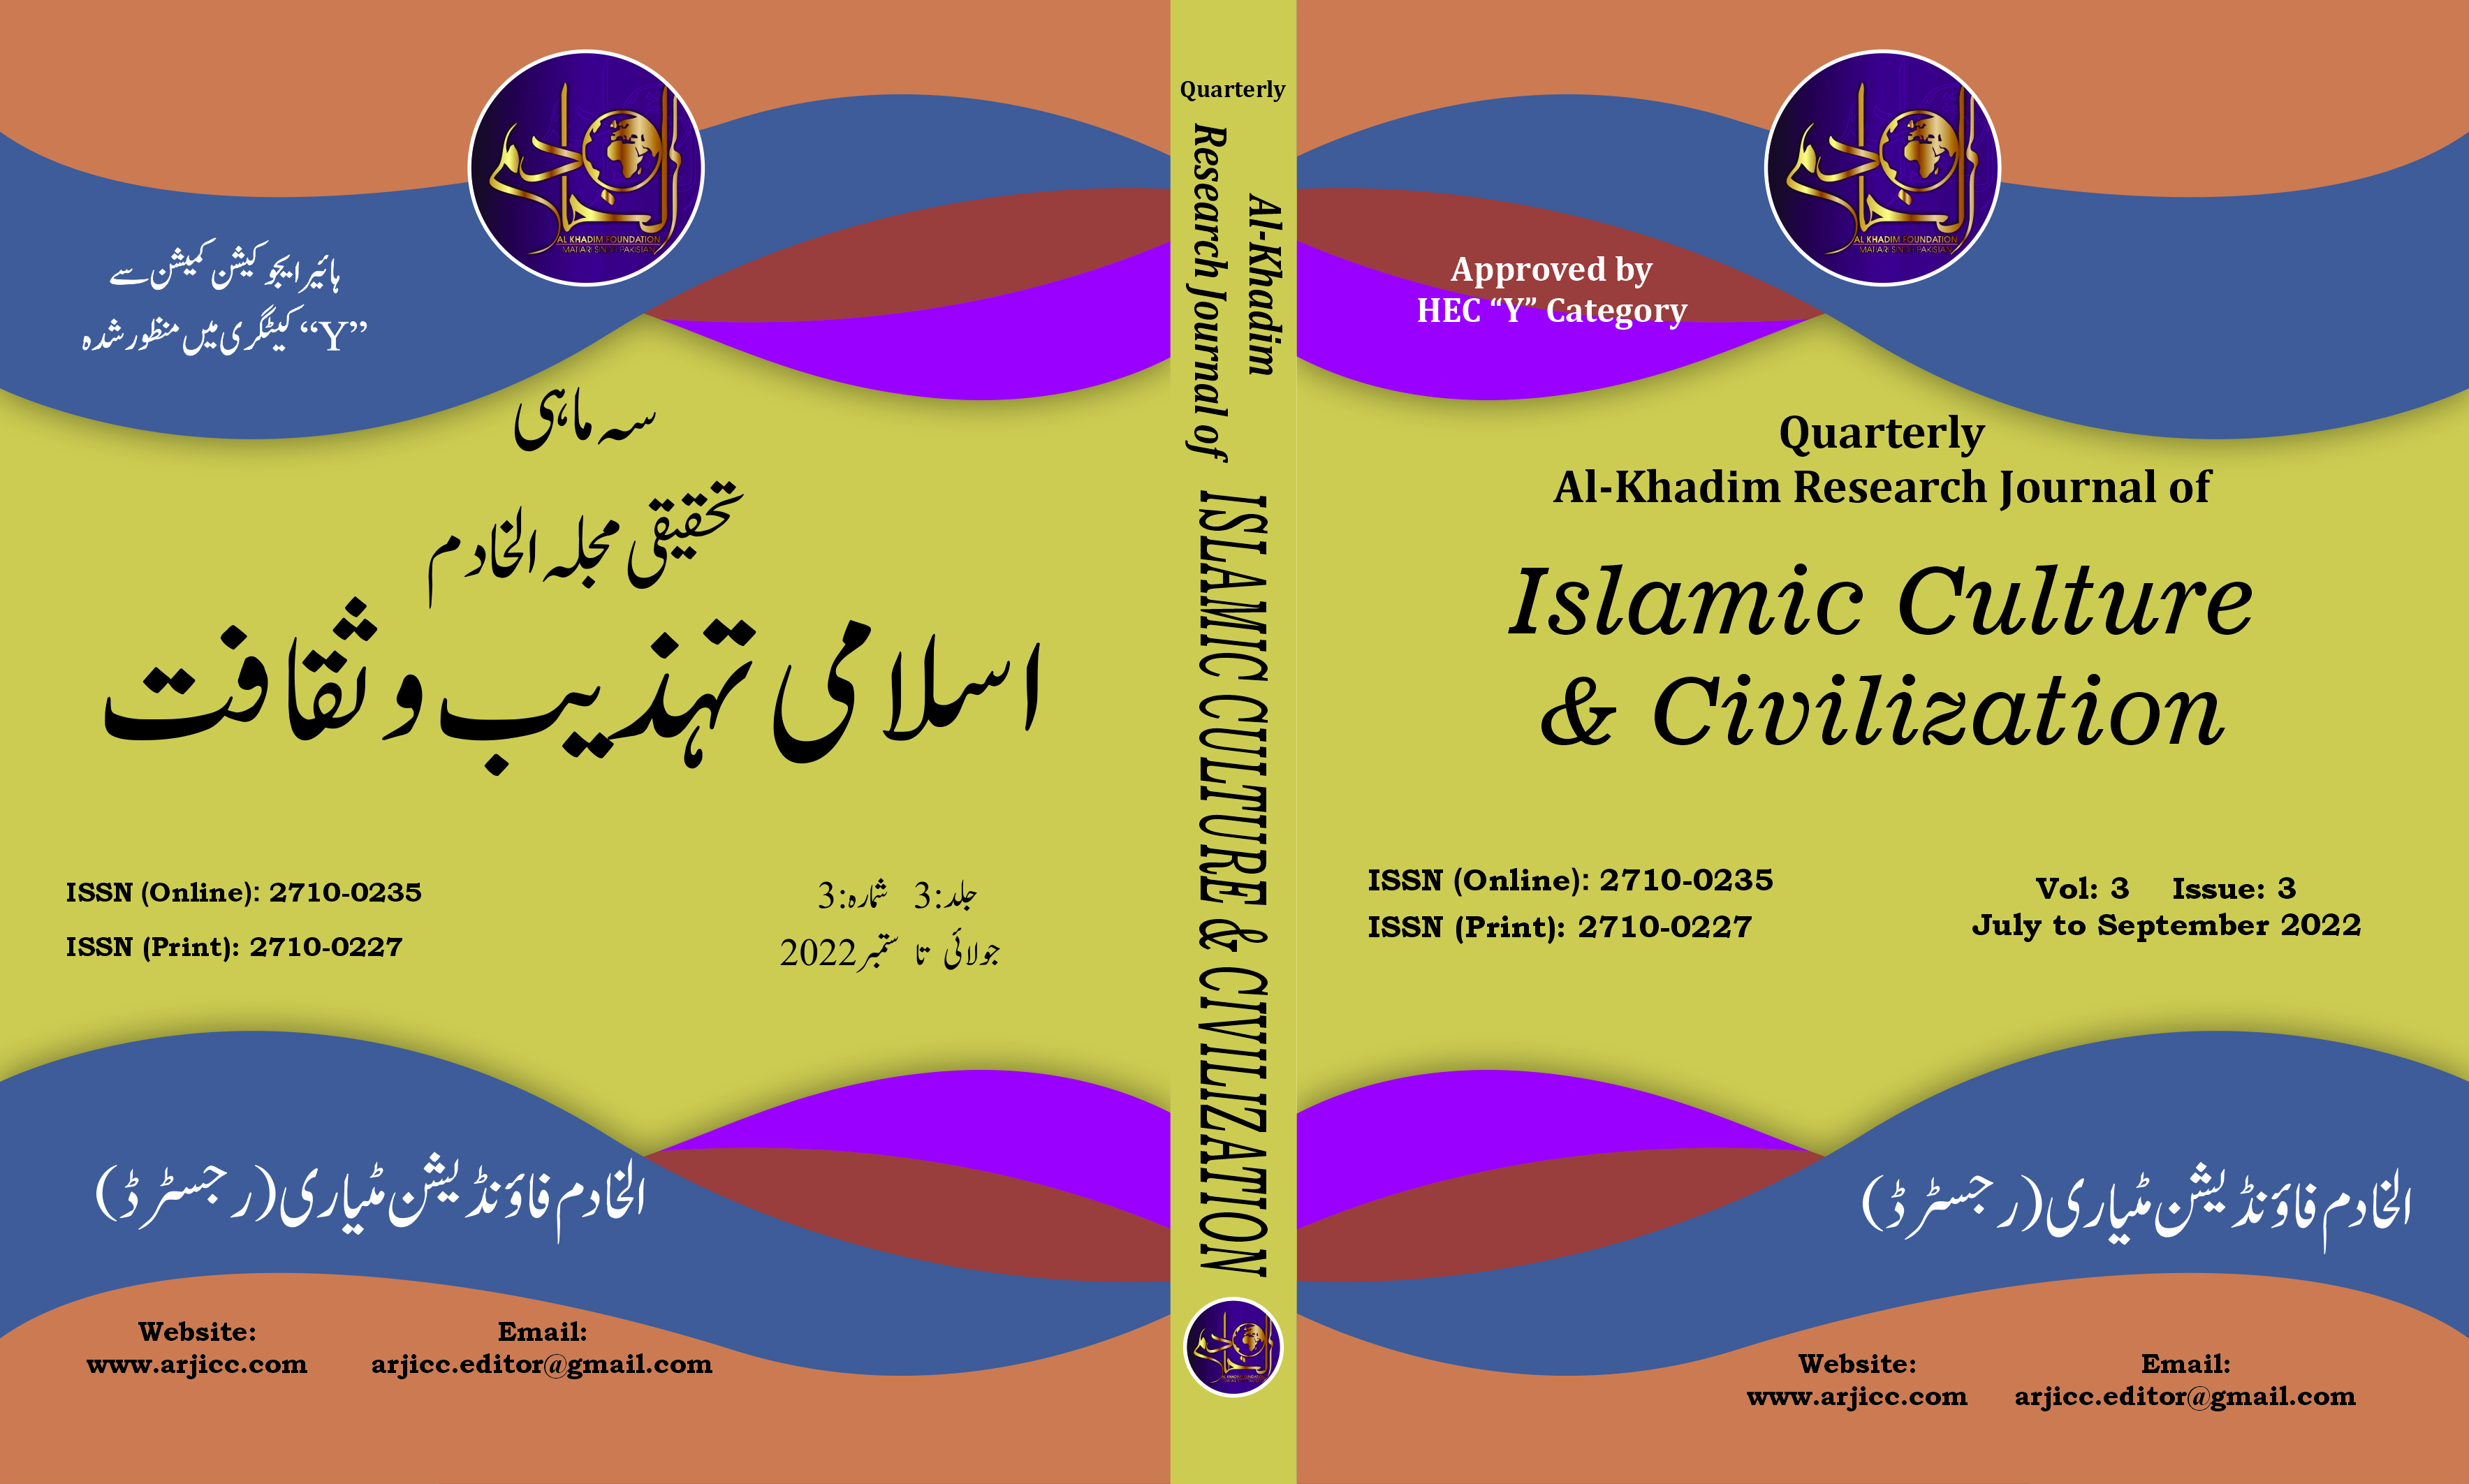 					View Vol. 3 No. 3 (2022): Al Khadim Research journal of Islamic culture and Civilization(July to September 2022)
				